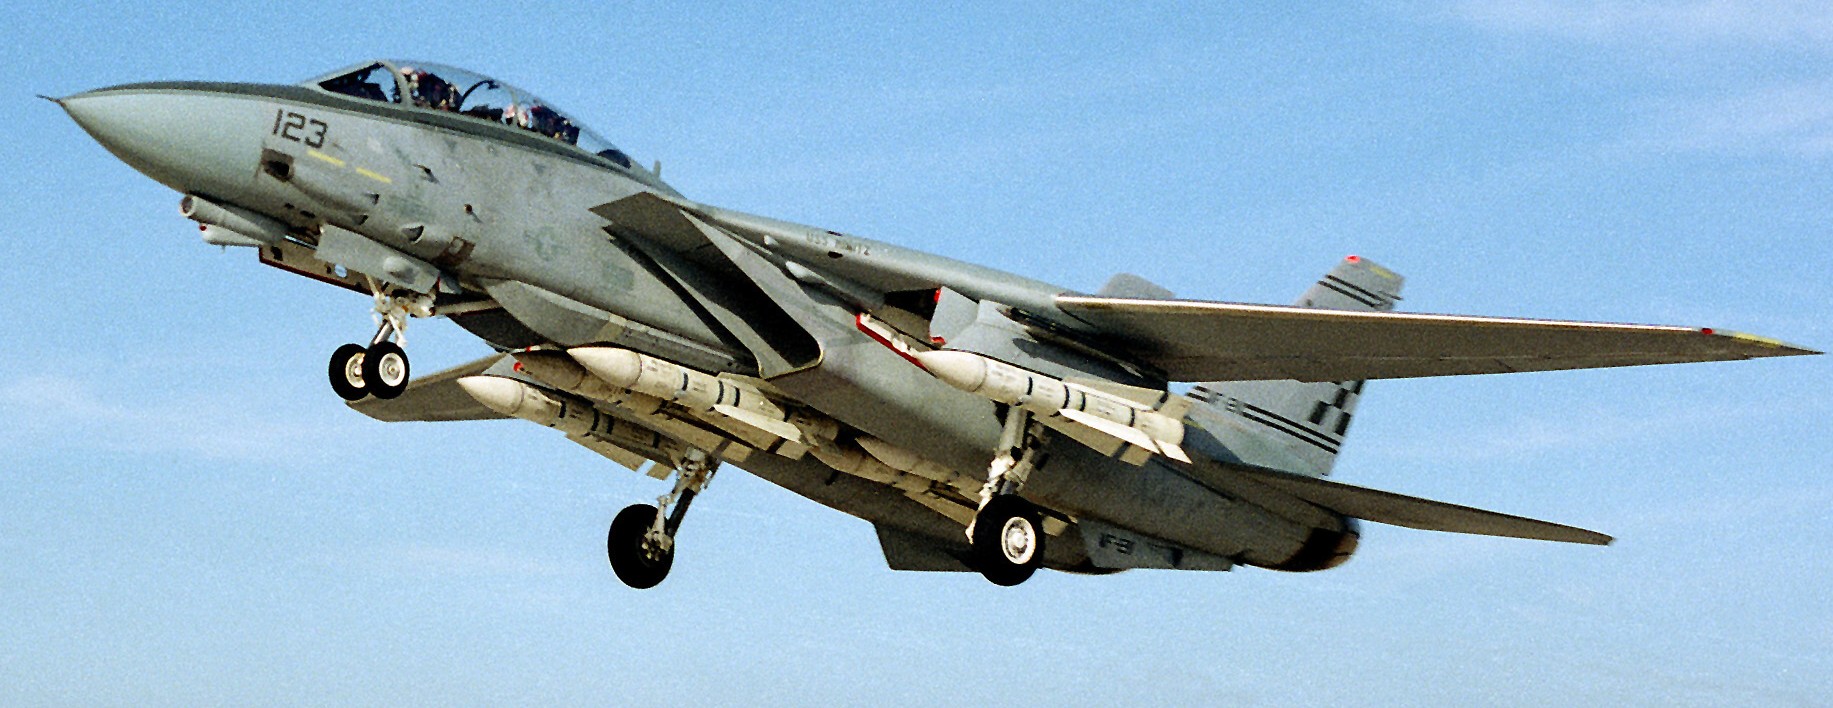 vf-211 fighting checkmates fighter squadron f-14a tomcat us navy carrier air wing cvw-9  90 nas miramar